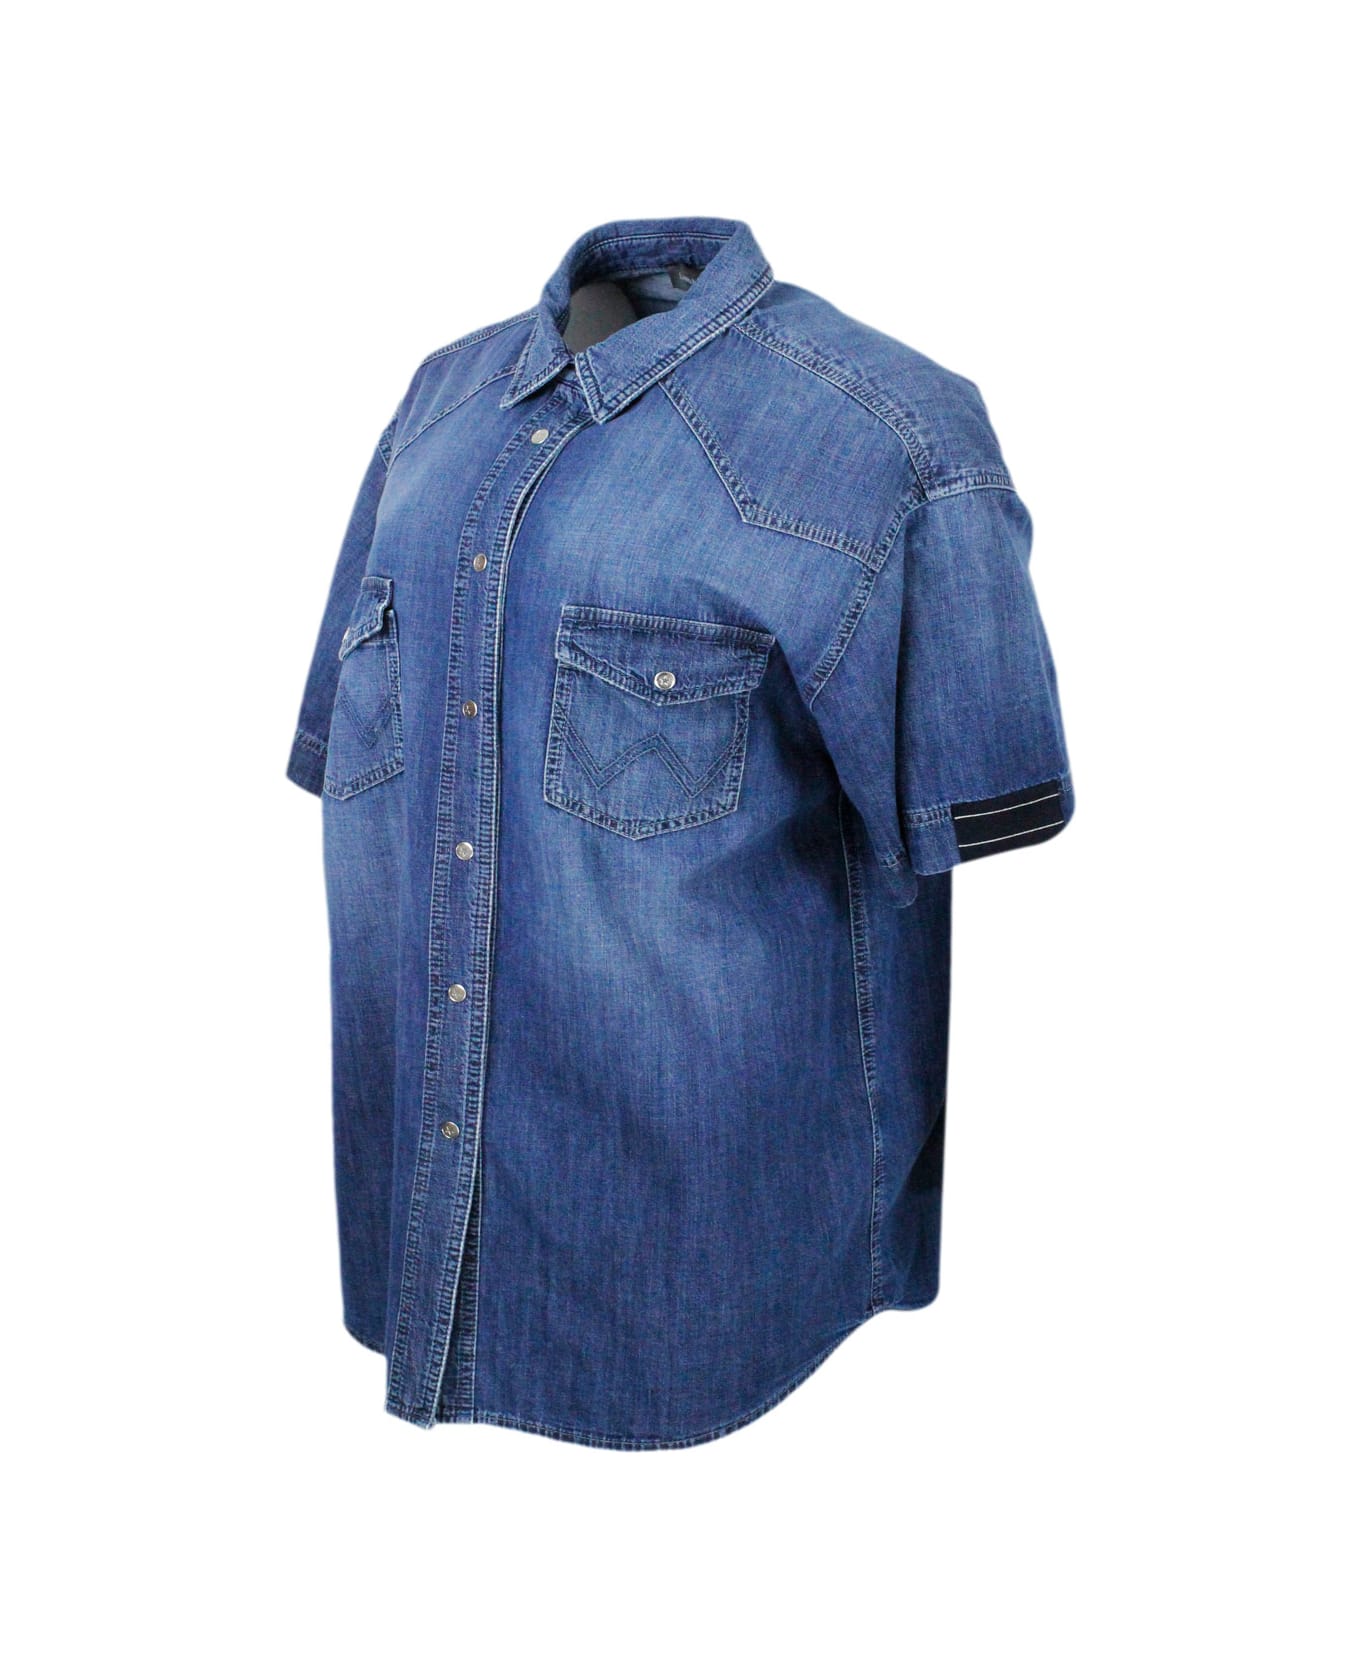 Lorena Antoniazzi Long Shirt In Light Chambray Denim Cotton With Short Sleeves With Button Closure And Patch Pockets, Details On The Sleeves - Denim シャツ